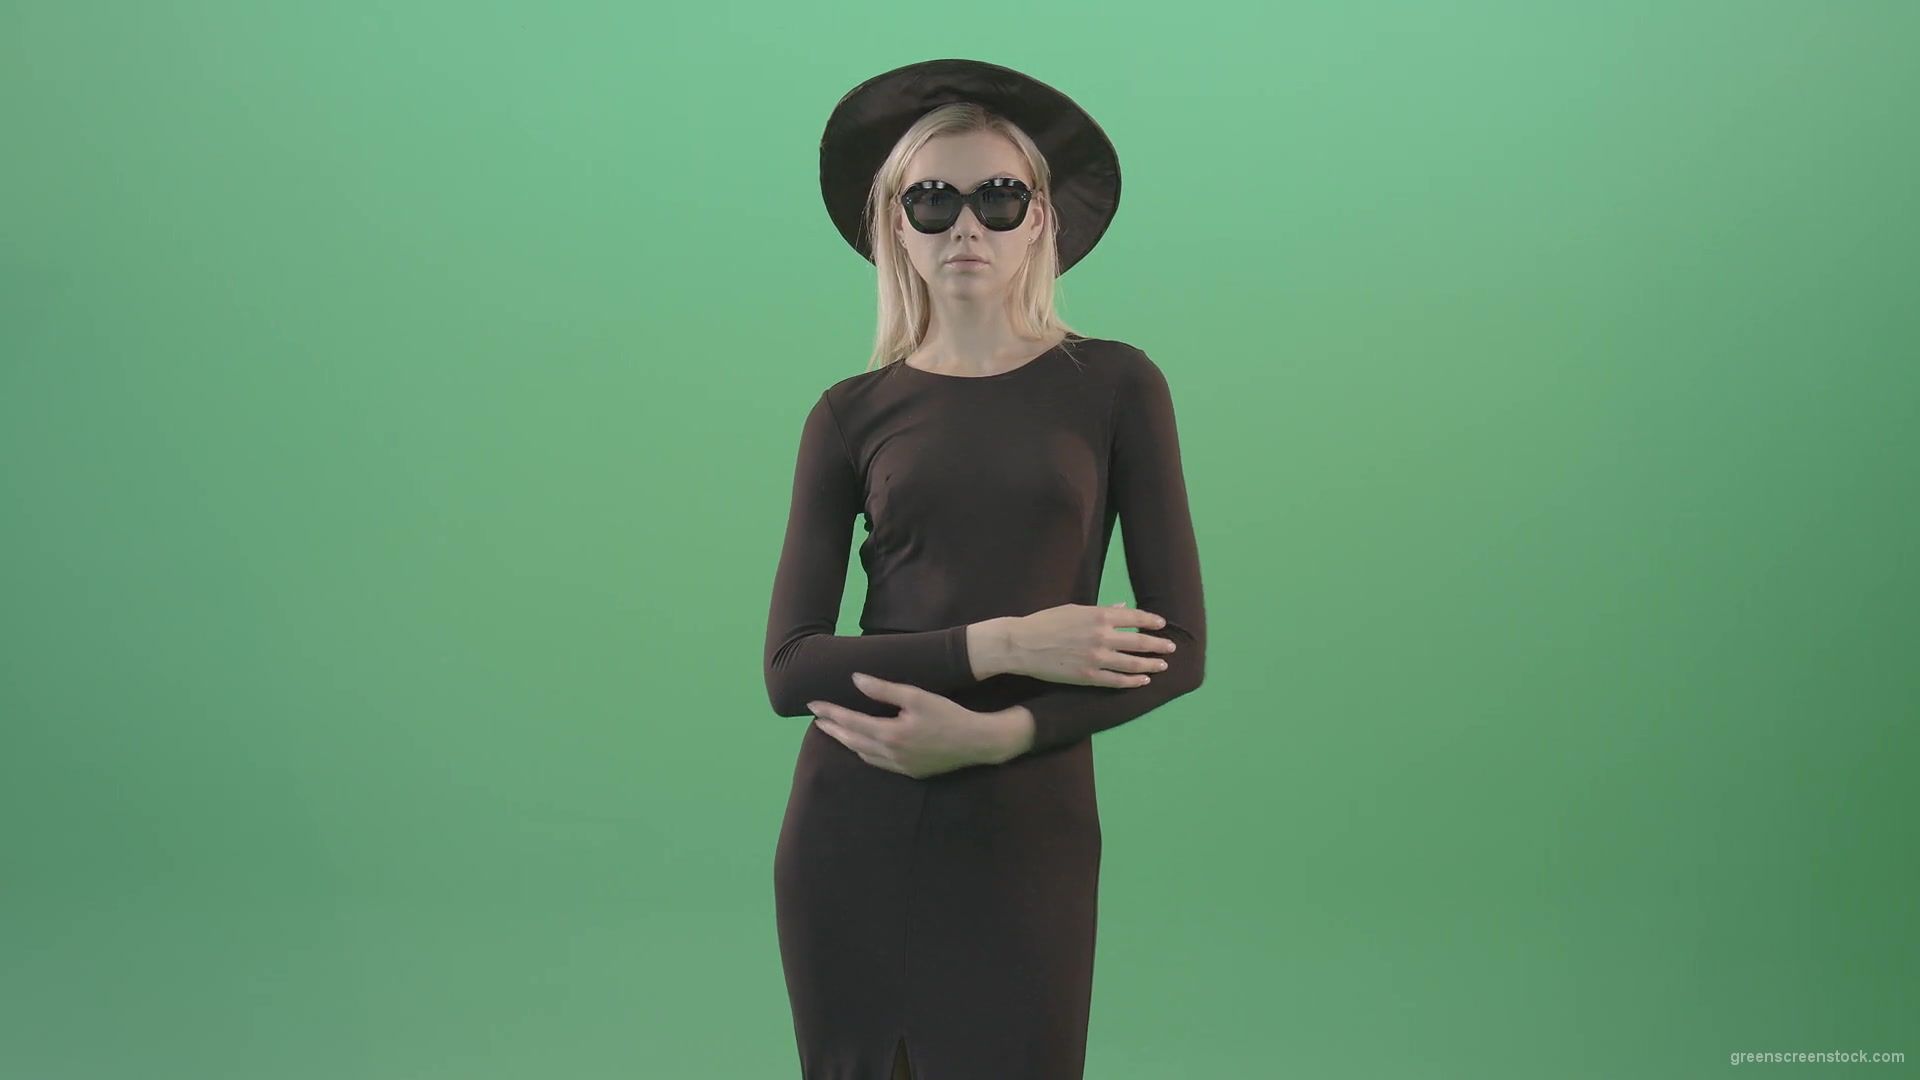 Luxury-elegant-girl-showing-photo-model-posing-gestures-isolated-on-Green-Screen-4K-Video-Footage-1-1920_002 Green Screen Stock